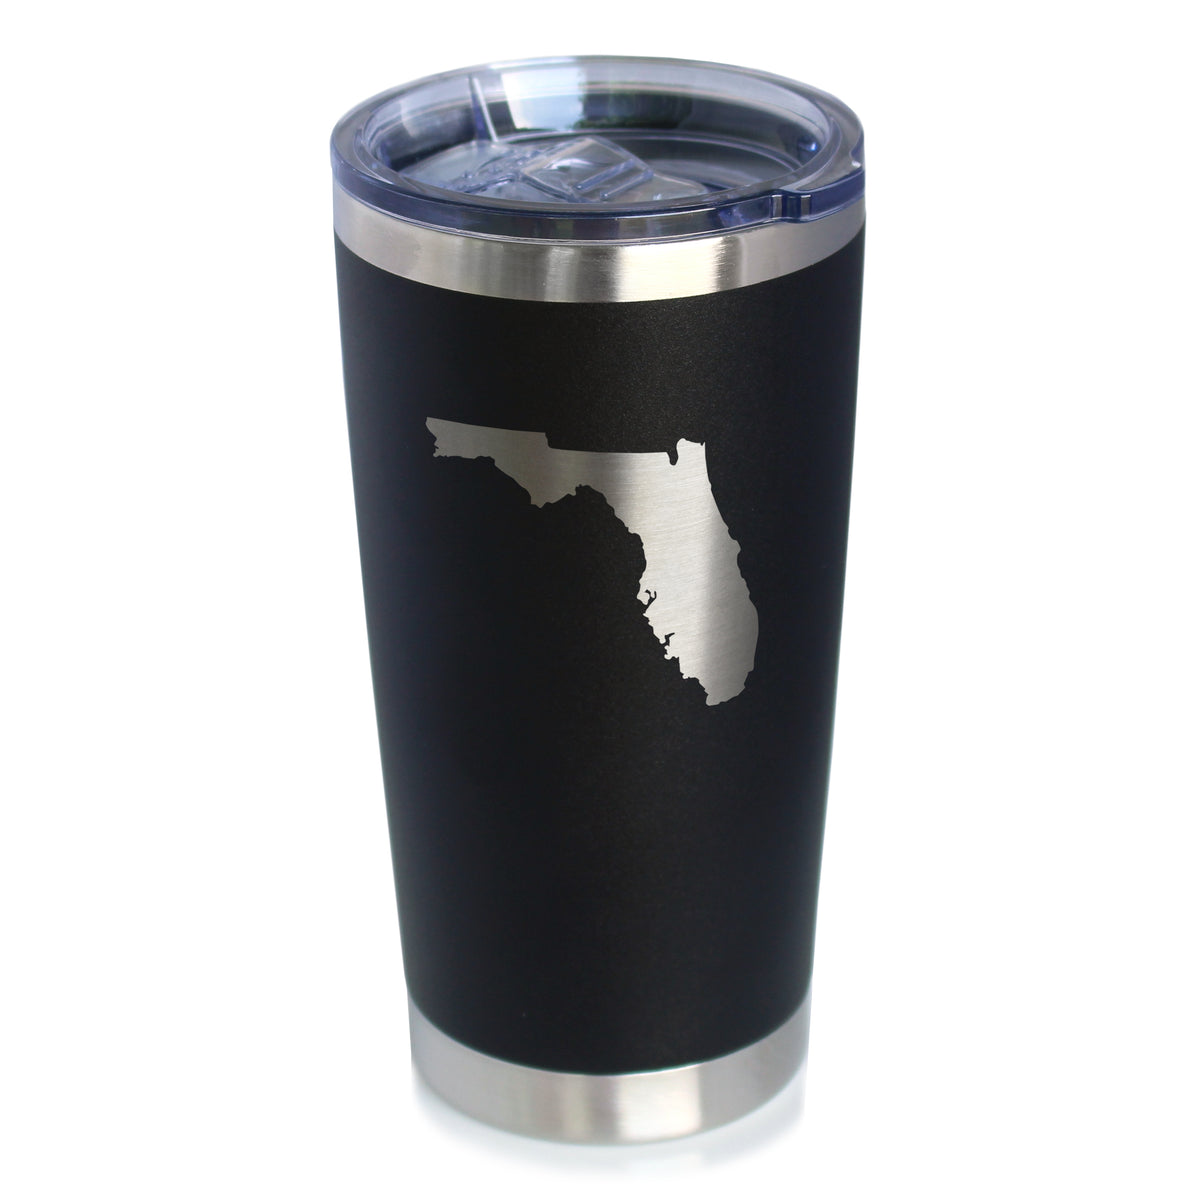 Florida State Outline - Insulated Coffee Tumbler Cup with Sliding Lid - Stainless Steel Coffee Mug - State Themed Outdoor Camping Gifts For Floridians